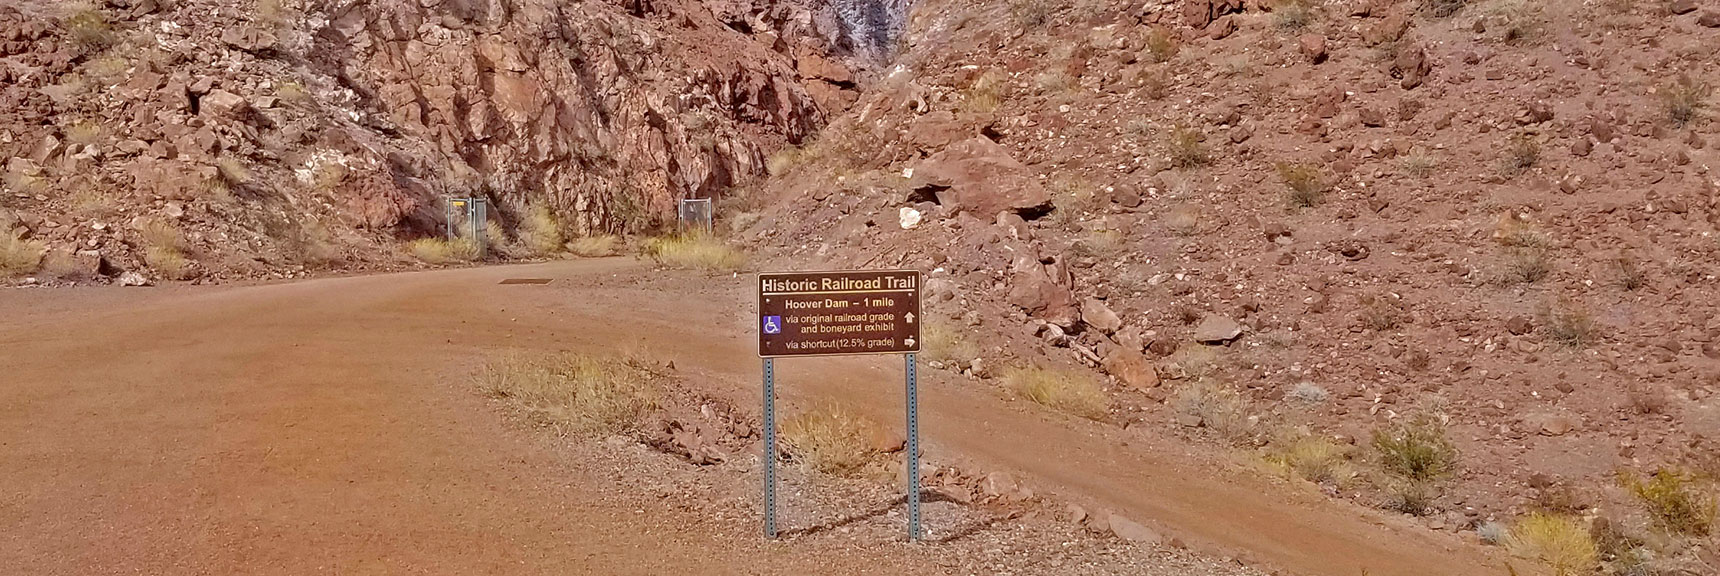 Split in Trail Beyond the Tunnels. 1 Mile Straight to Hoover Dam or Steeper Shortcut to Right | Historic Railroad Trail | Lake Mead National Recreation Area, Nevada